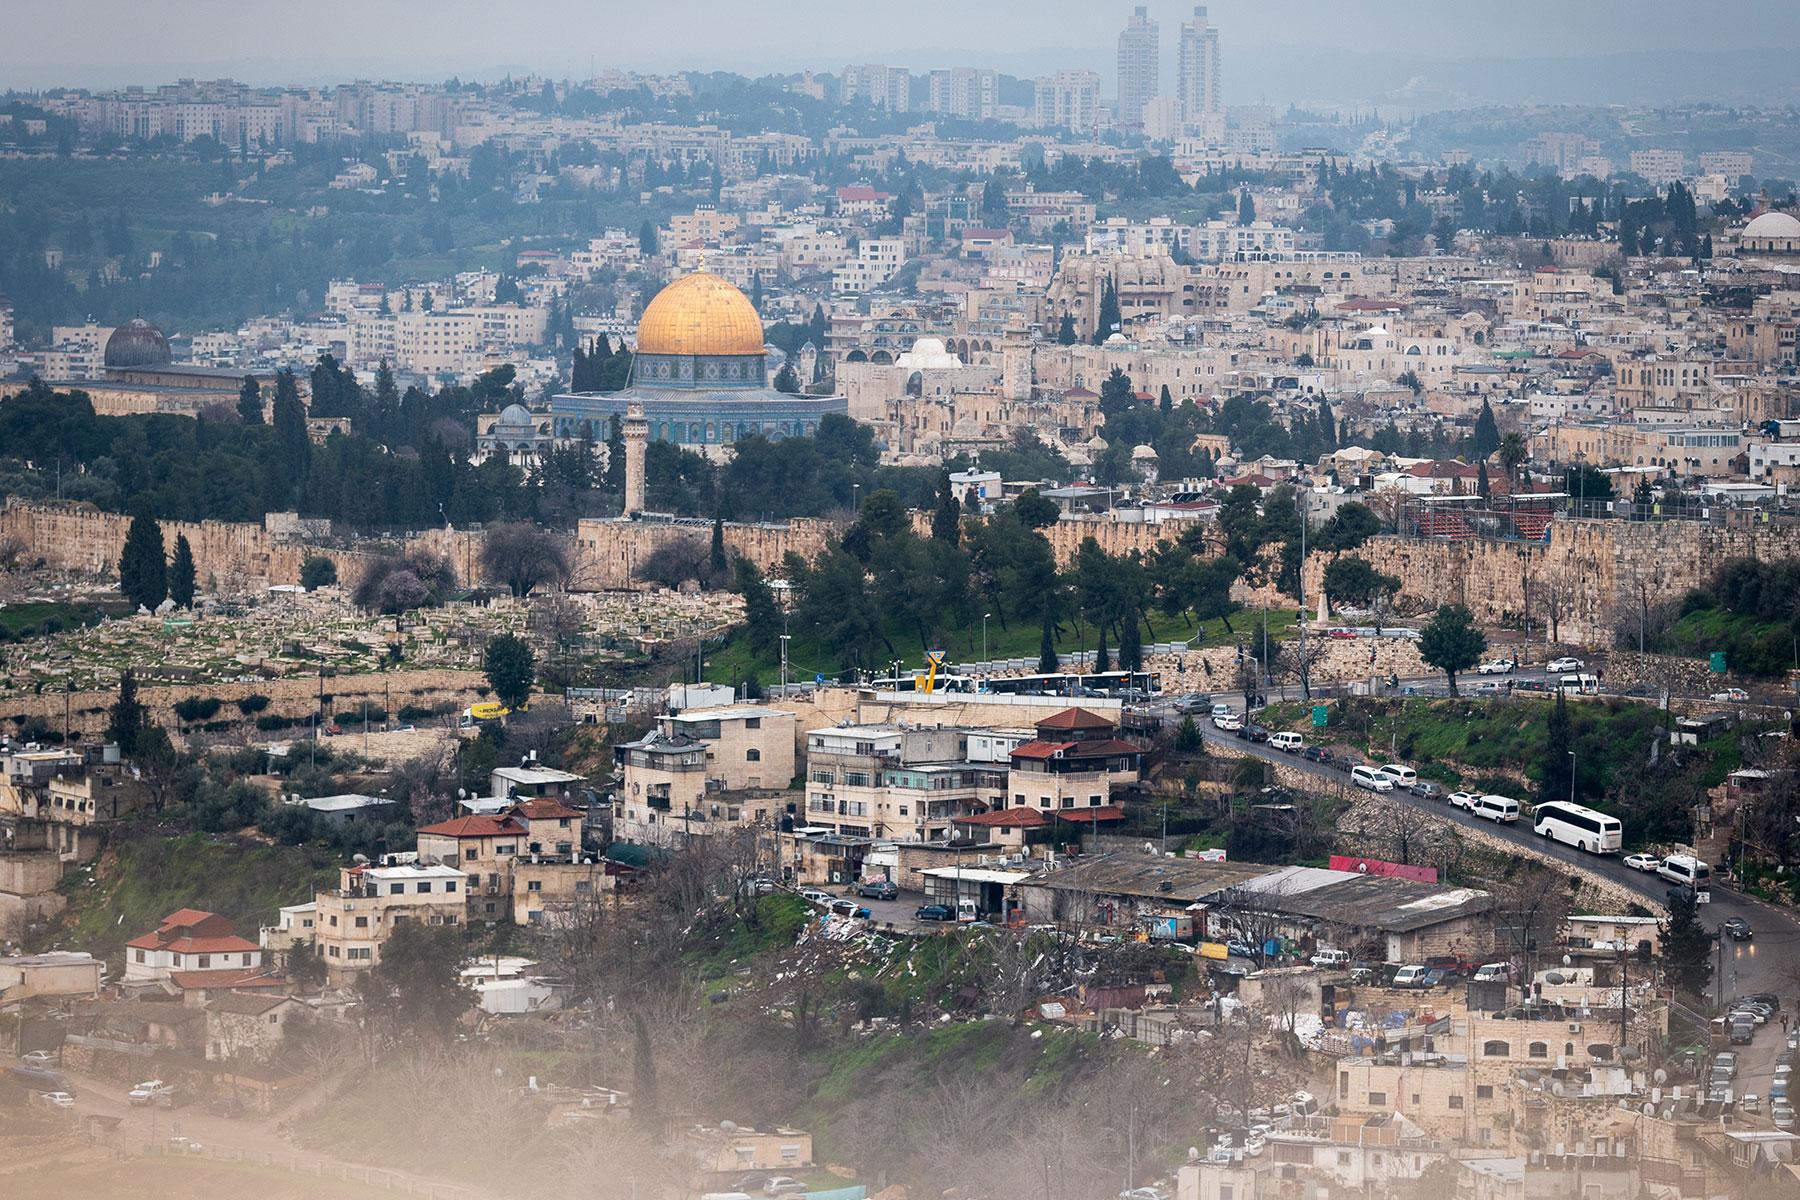 View of the Jerusalem Old City from the Mount of Olives. Photo: LWF/Albin Hillert